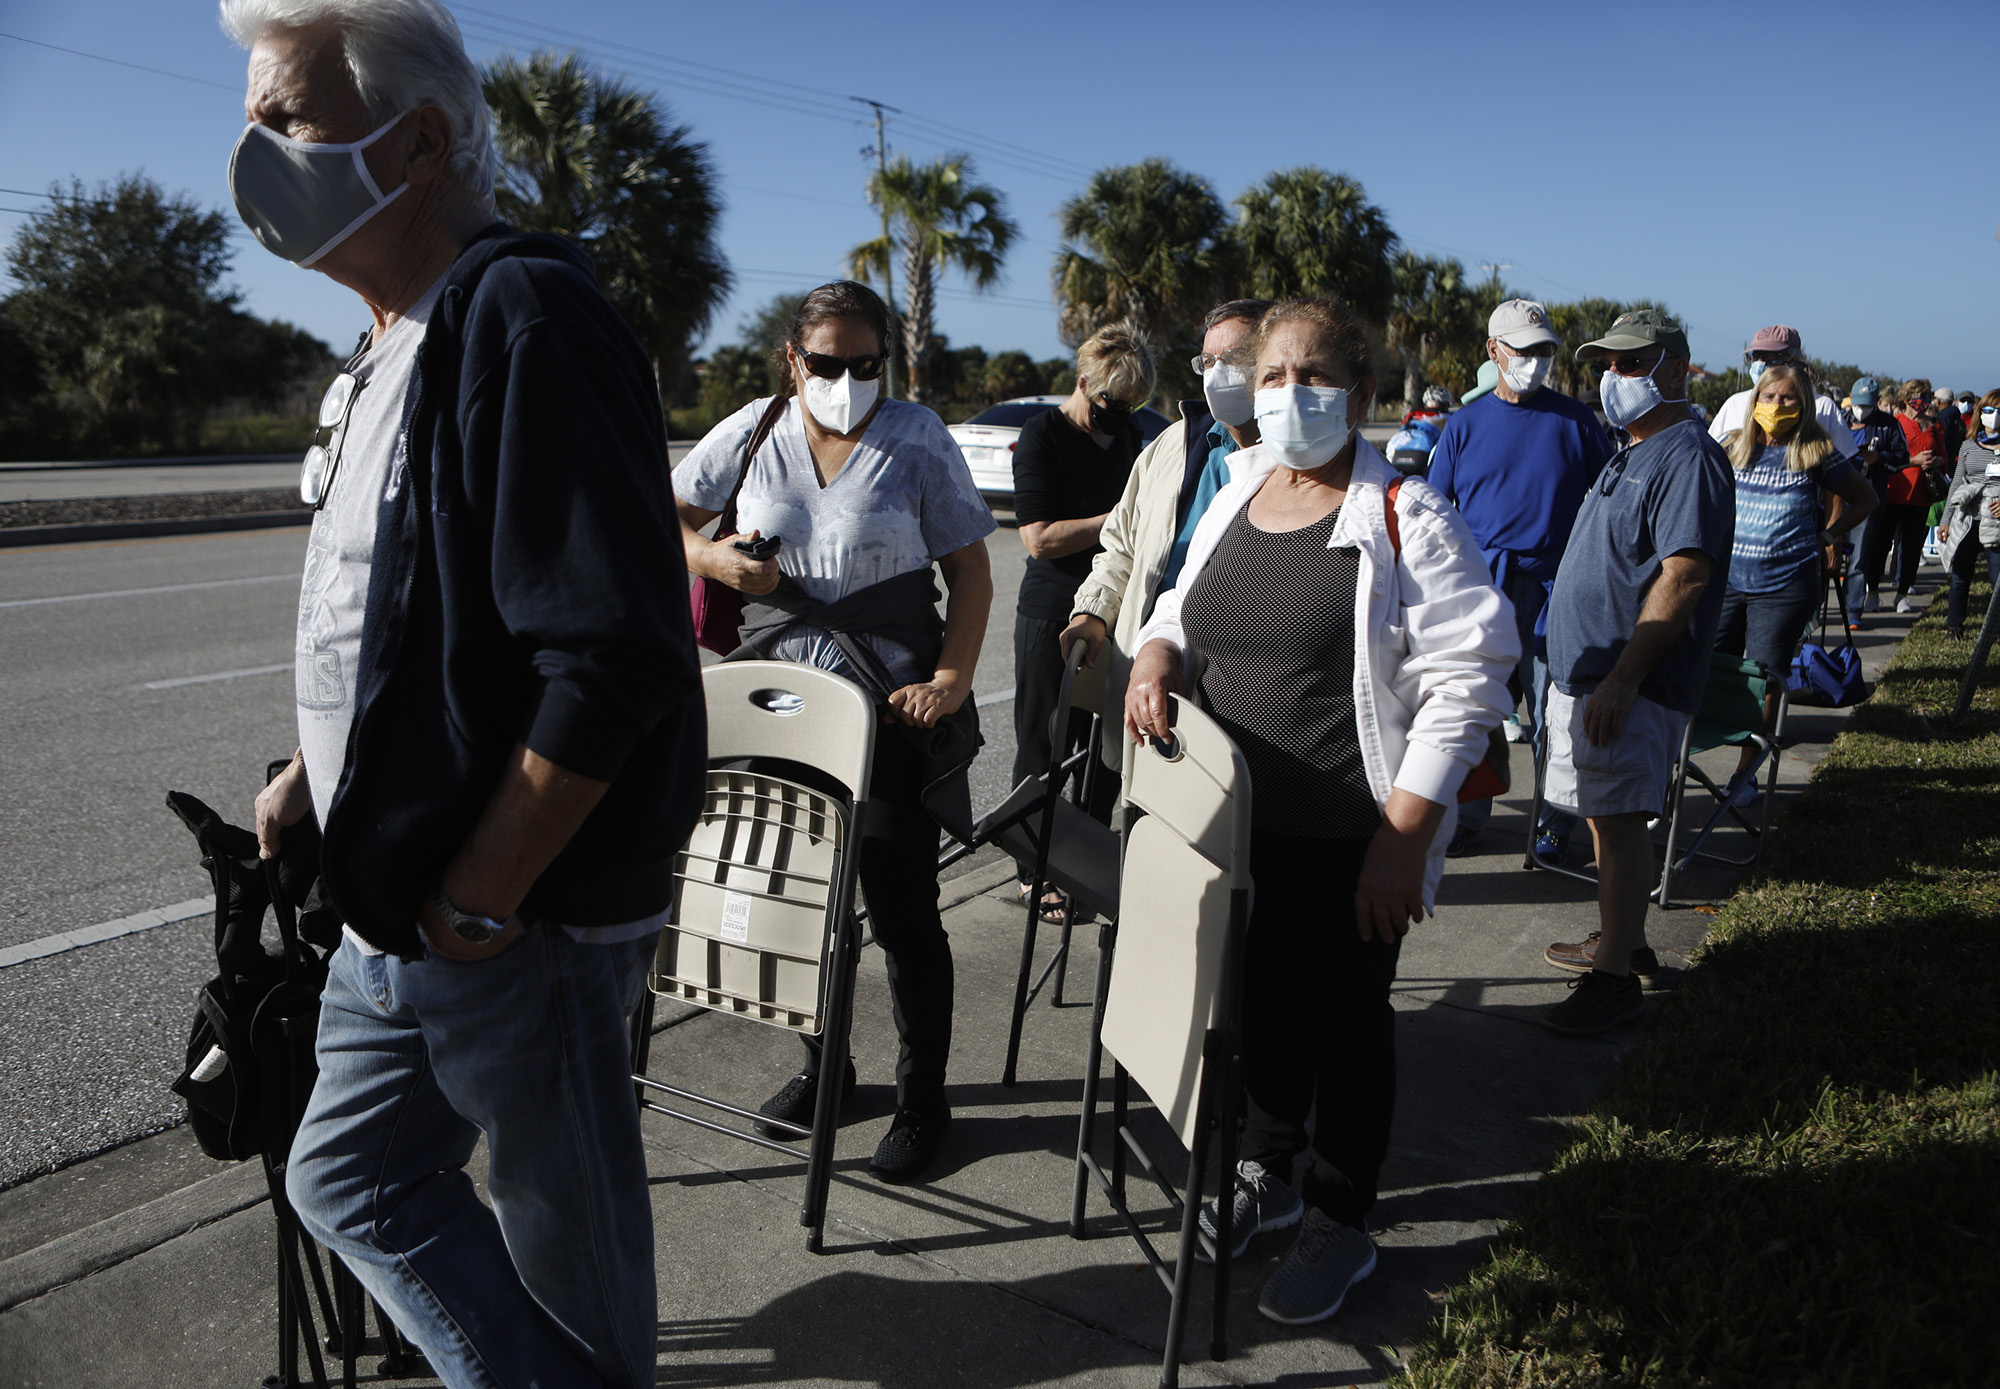 People wait in line to receive a Covid-19 vaccine in Fort Myers, Florida.